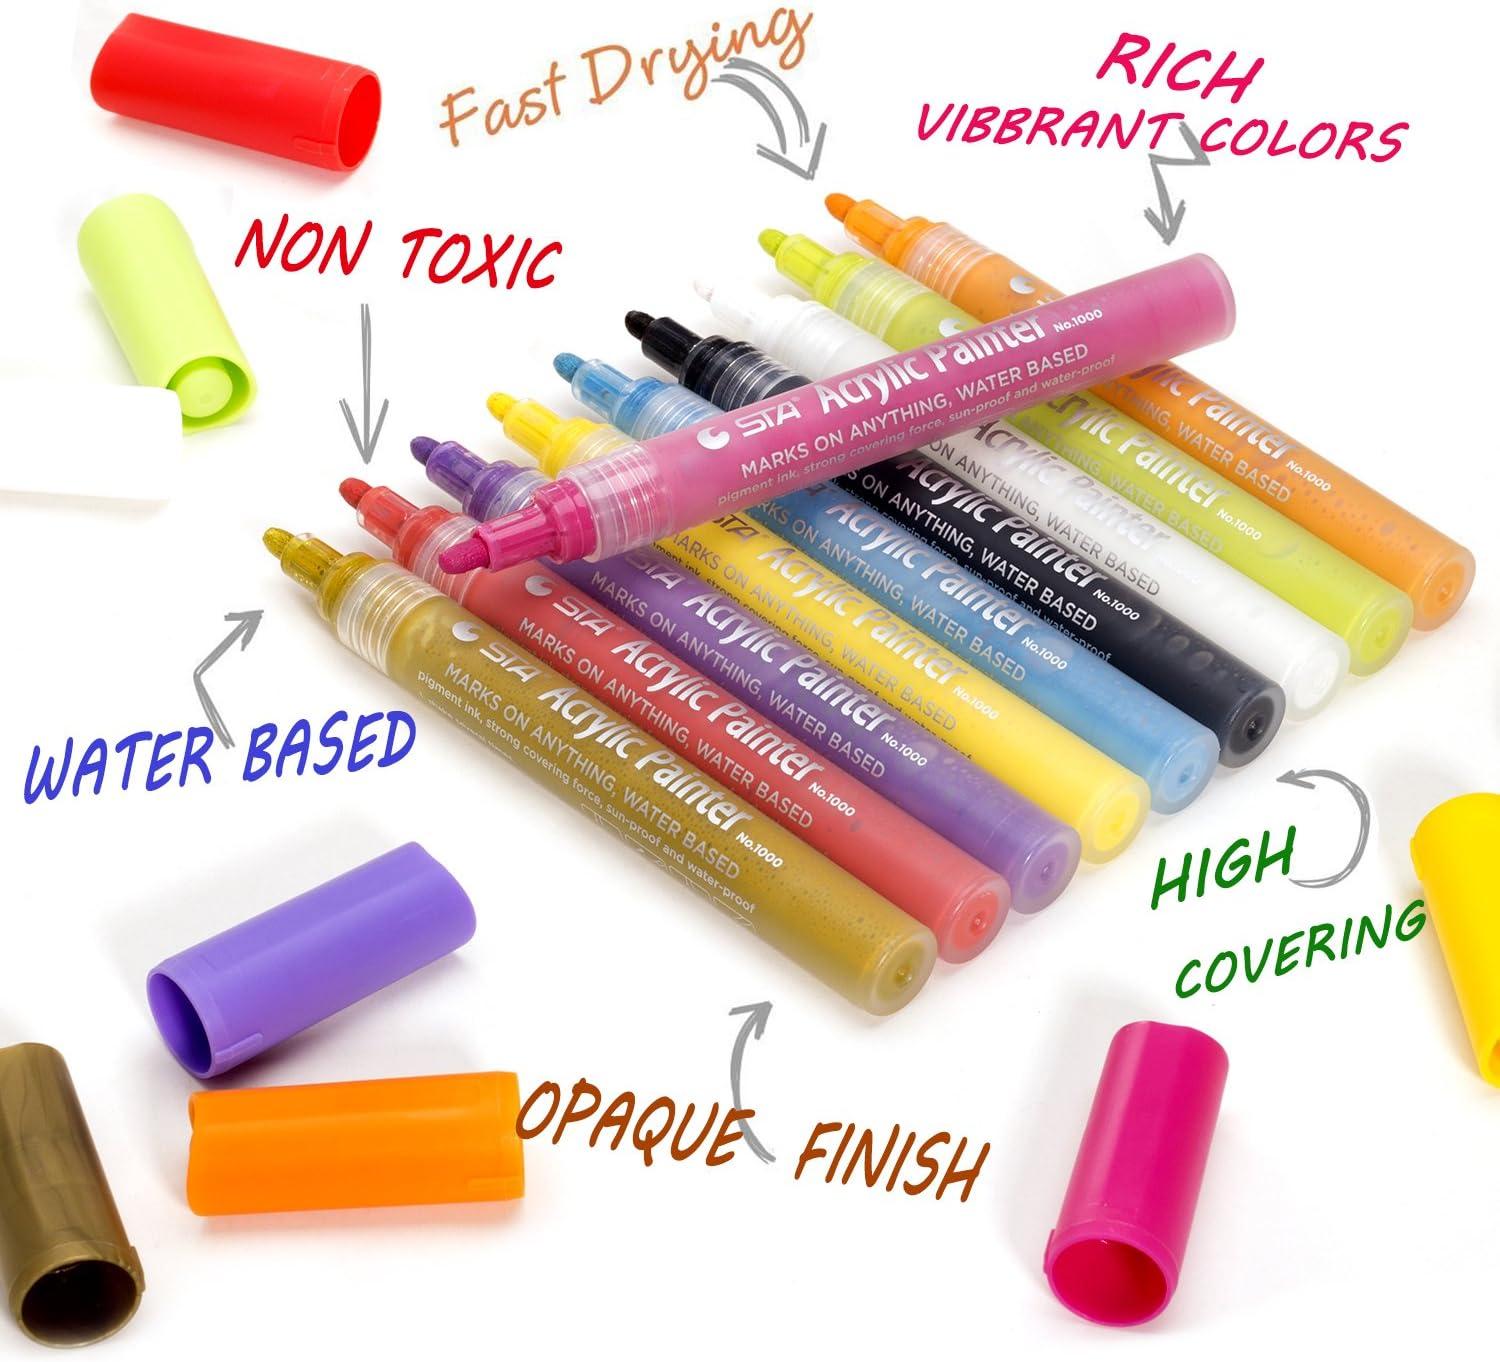 Paint Pens Acrylic Markers Set (12-Color)  For Rock Painting Glass Wood  Porcelain Ceramic Fabric Paper Kindness Rocks Mugs Calligraphy Unique Arts  and Crafts Supplies (Medium Point)